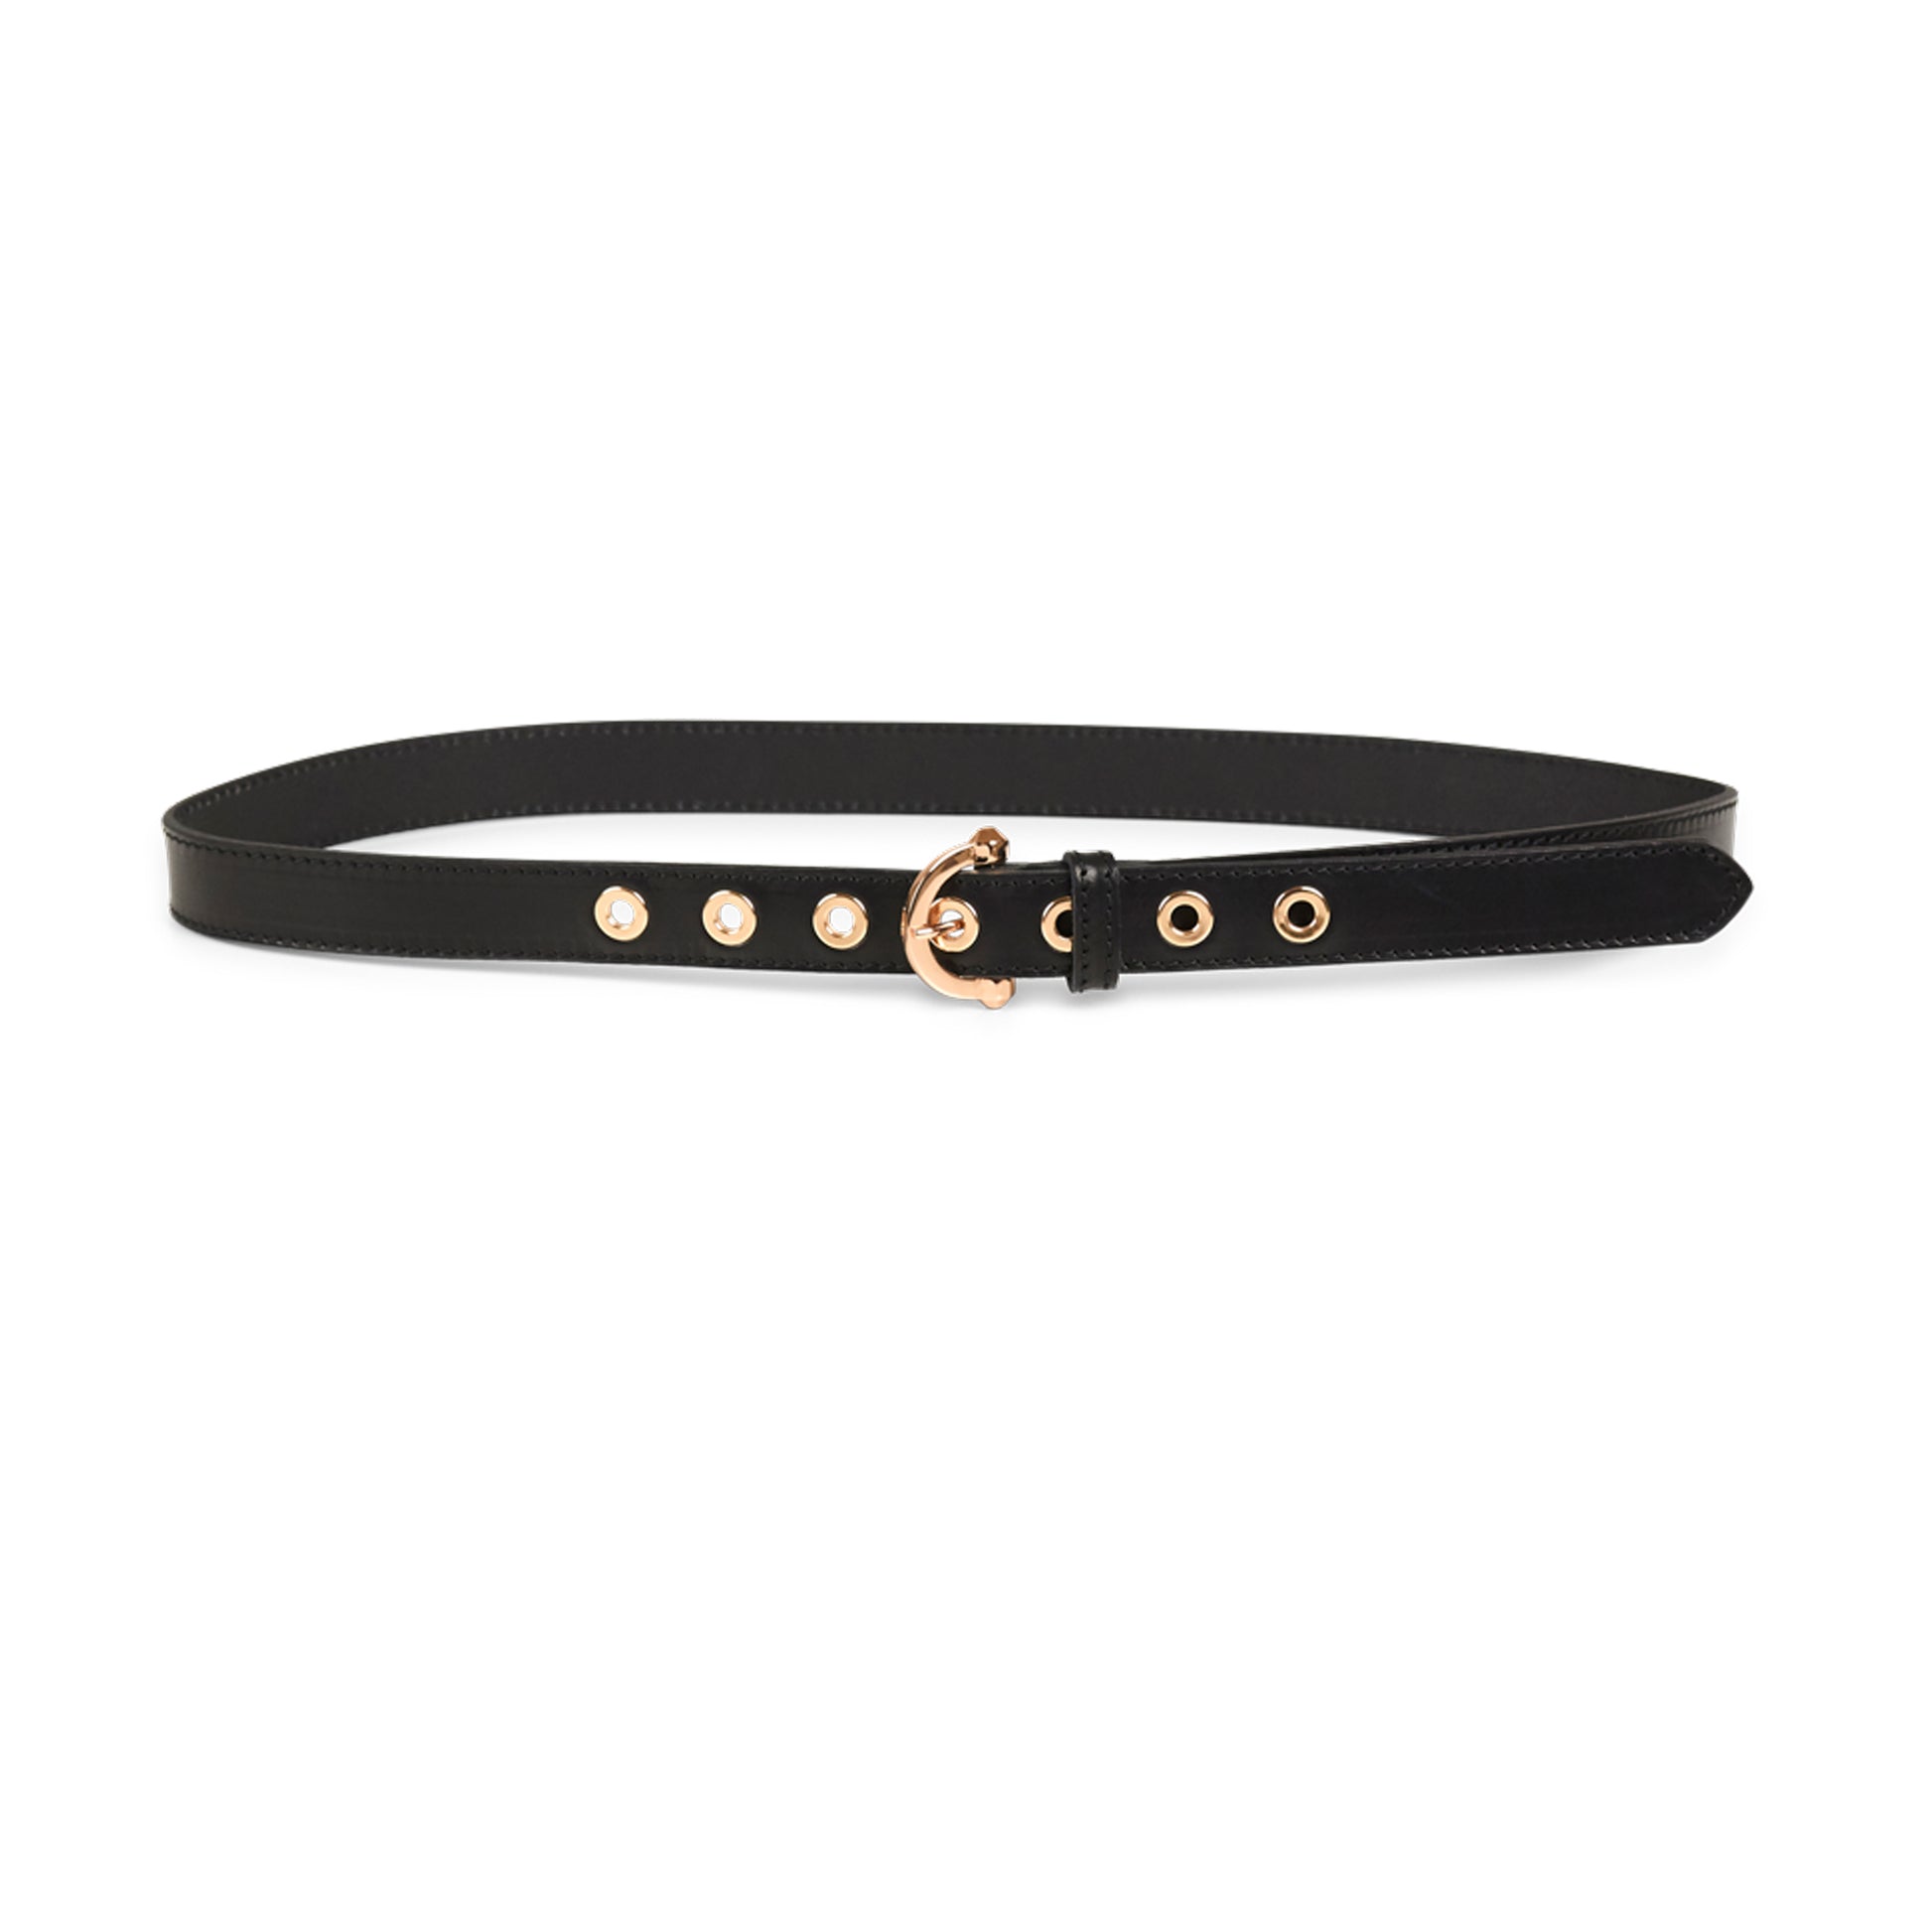 A slim TheodoraMBG belt - Black/Rose Gold by Markberg with a gold buckle.